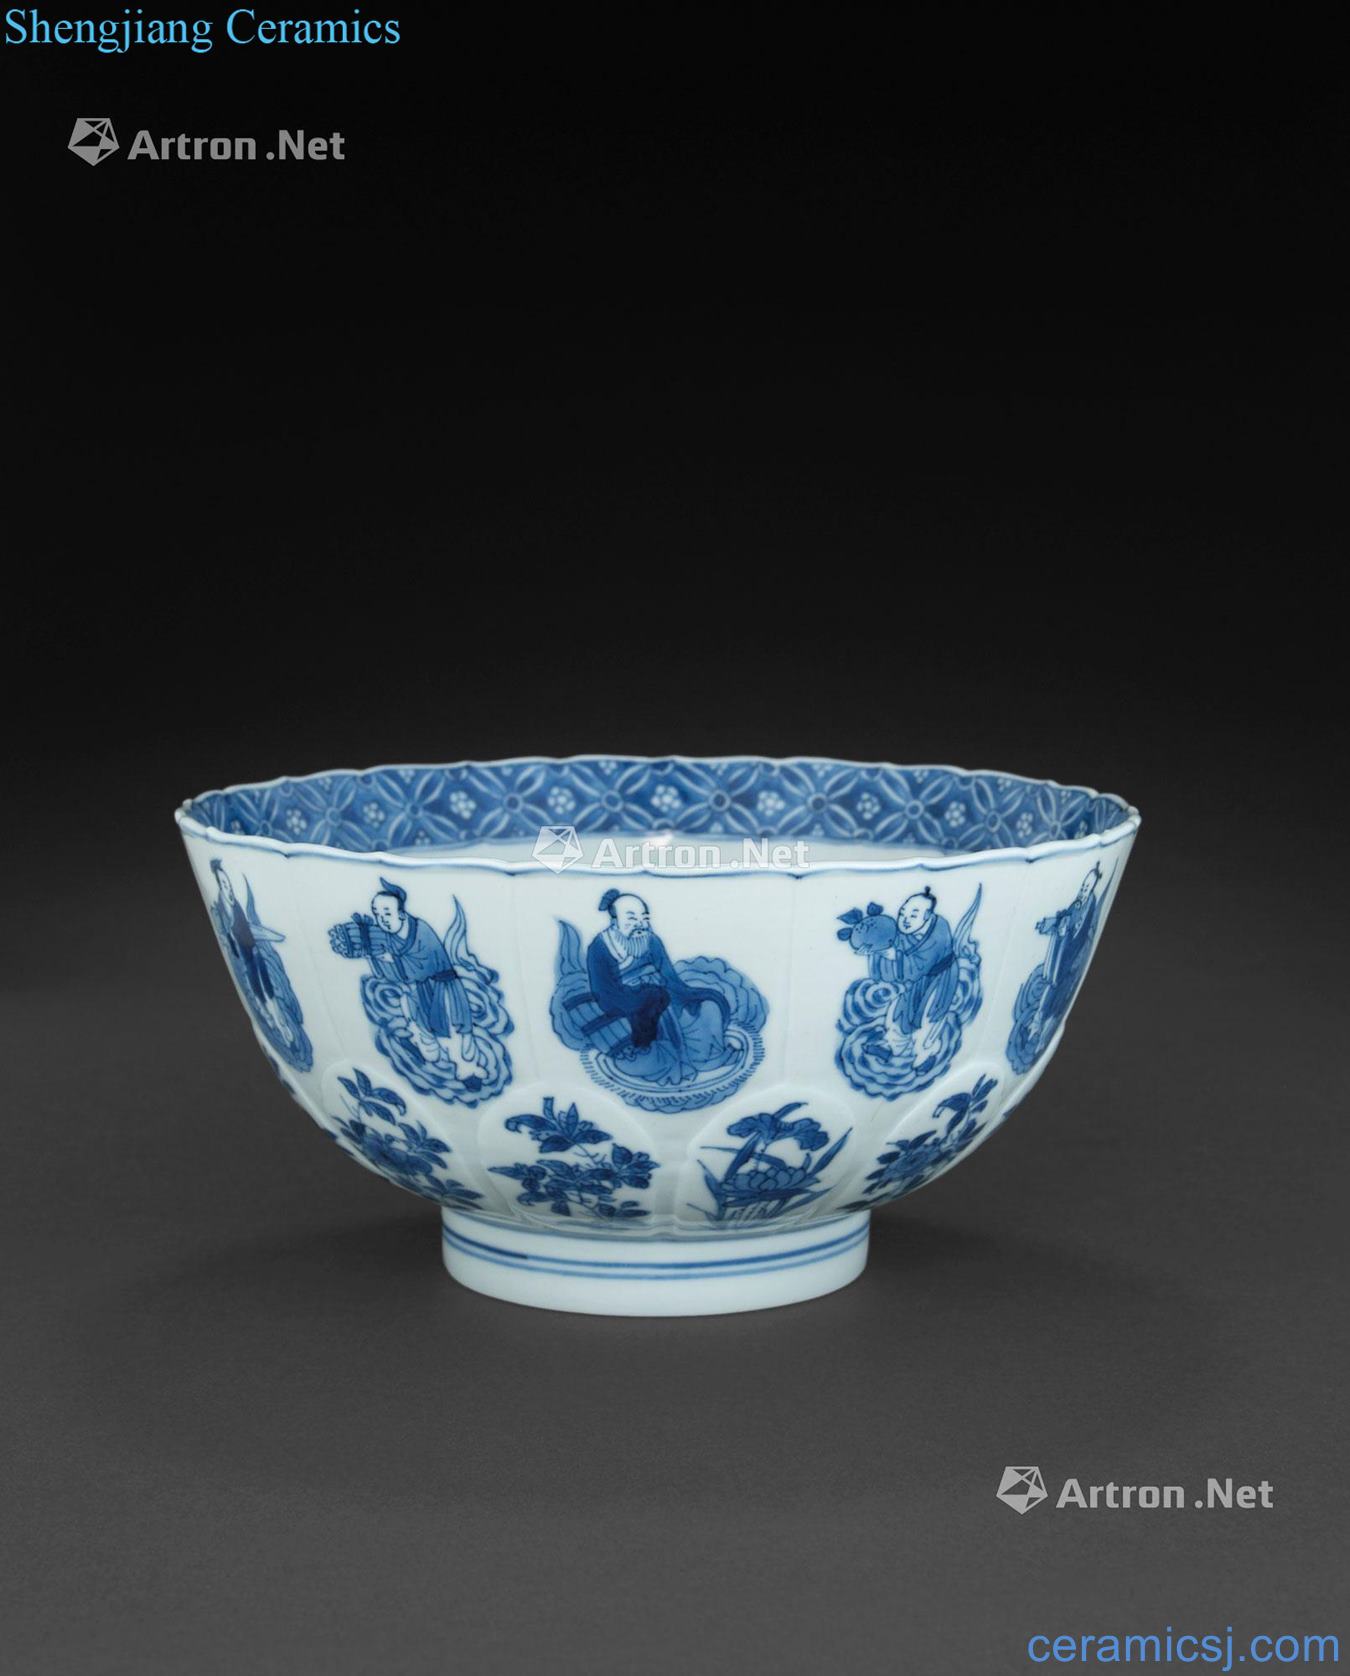 The qing emperor kangxi Blue and white figure 盌 and landscape the flask the eight immortals